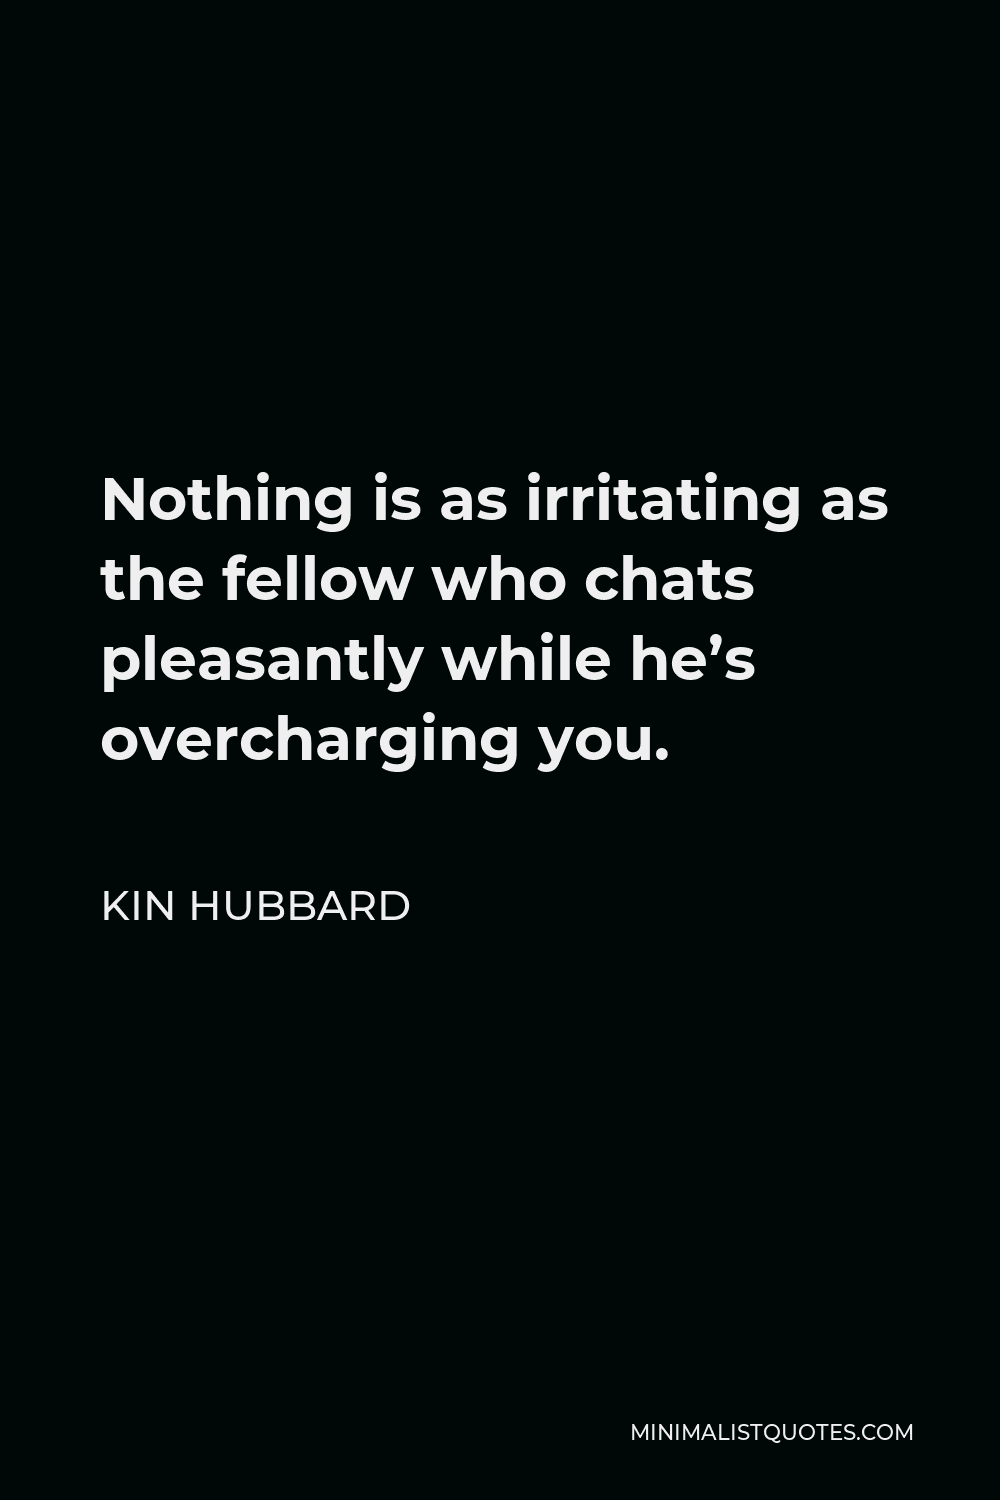 Kin Hubbard Quote - Nothing is as irritating as the fellow who chats pleasantly while he’s overcharging you.